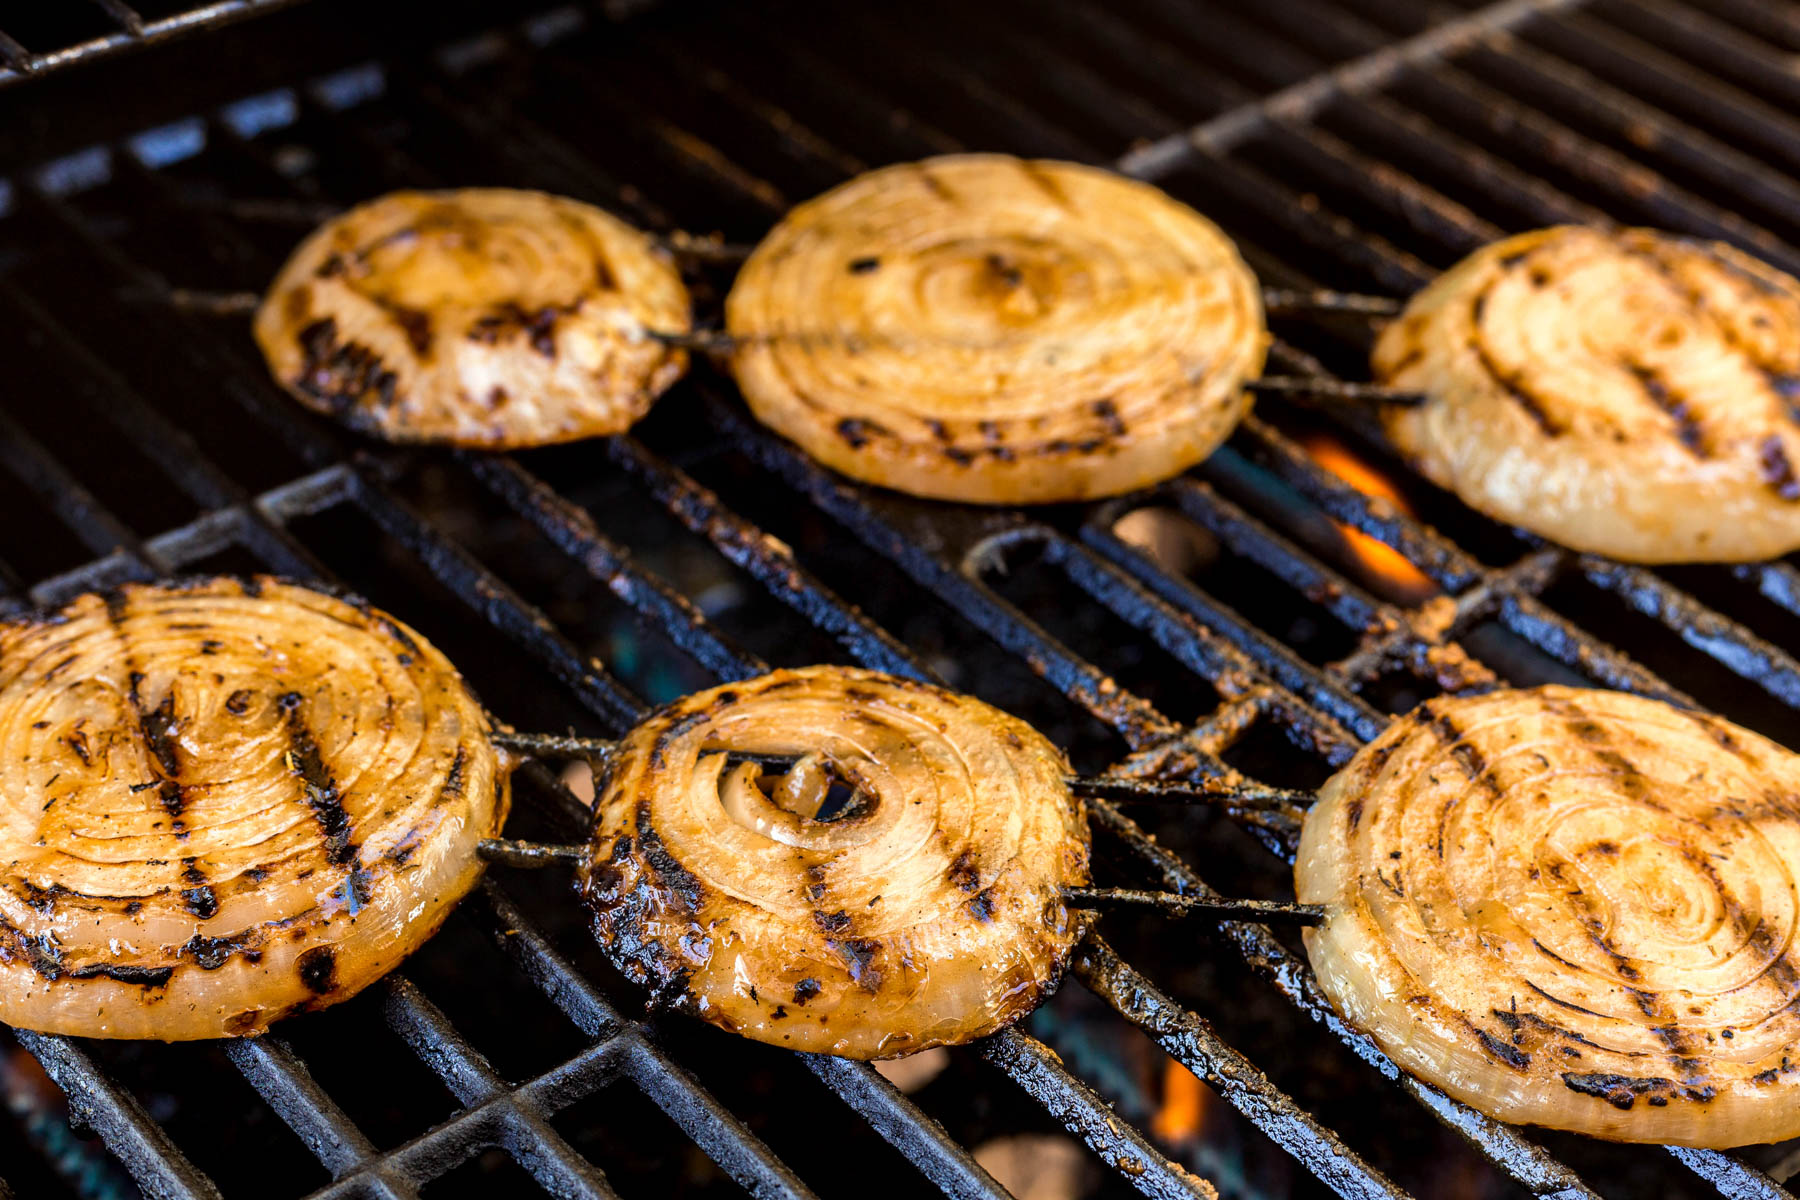 Mustard Grilled Onions on skewers cooking on a hot grill.